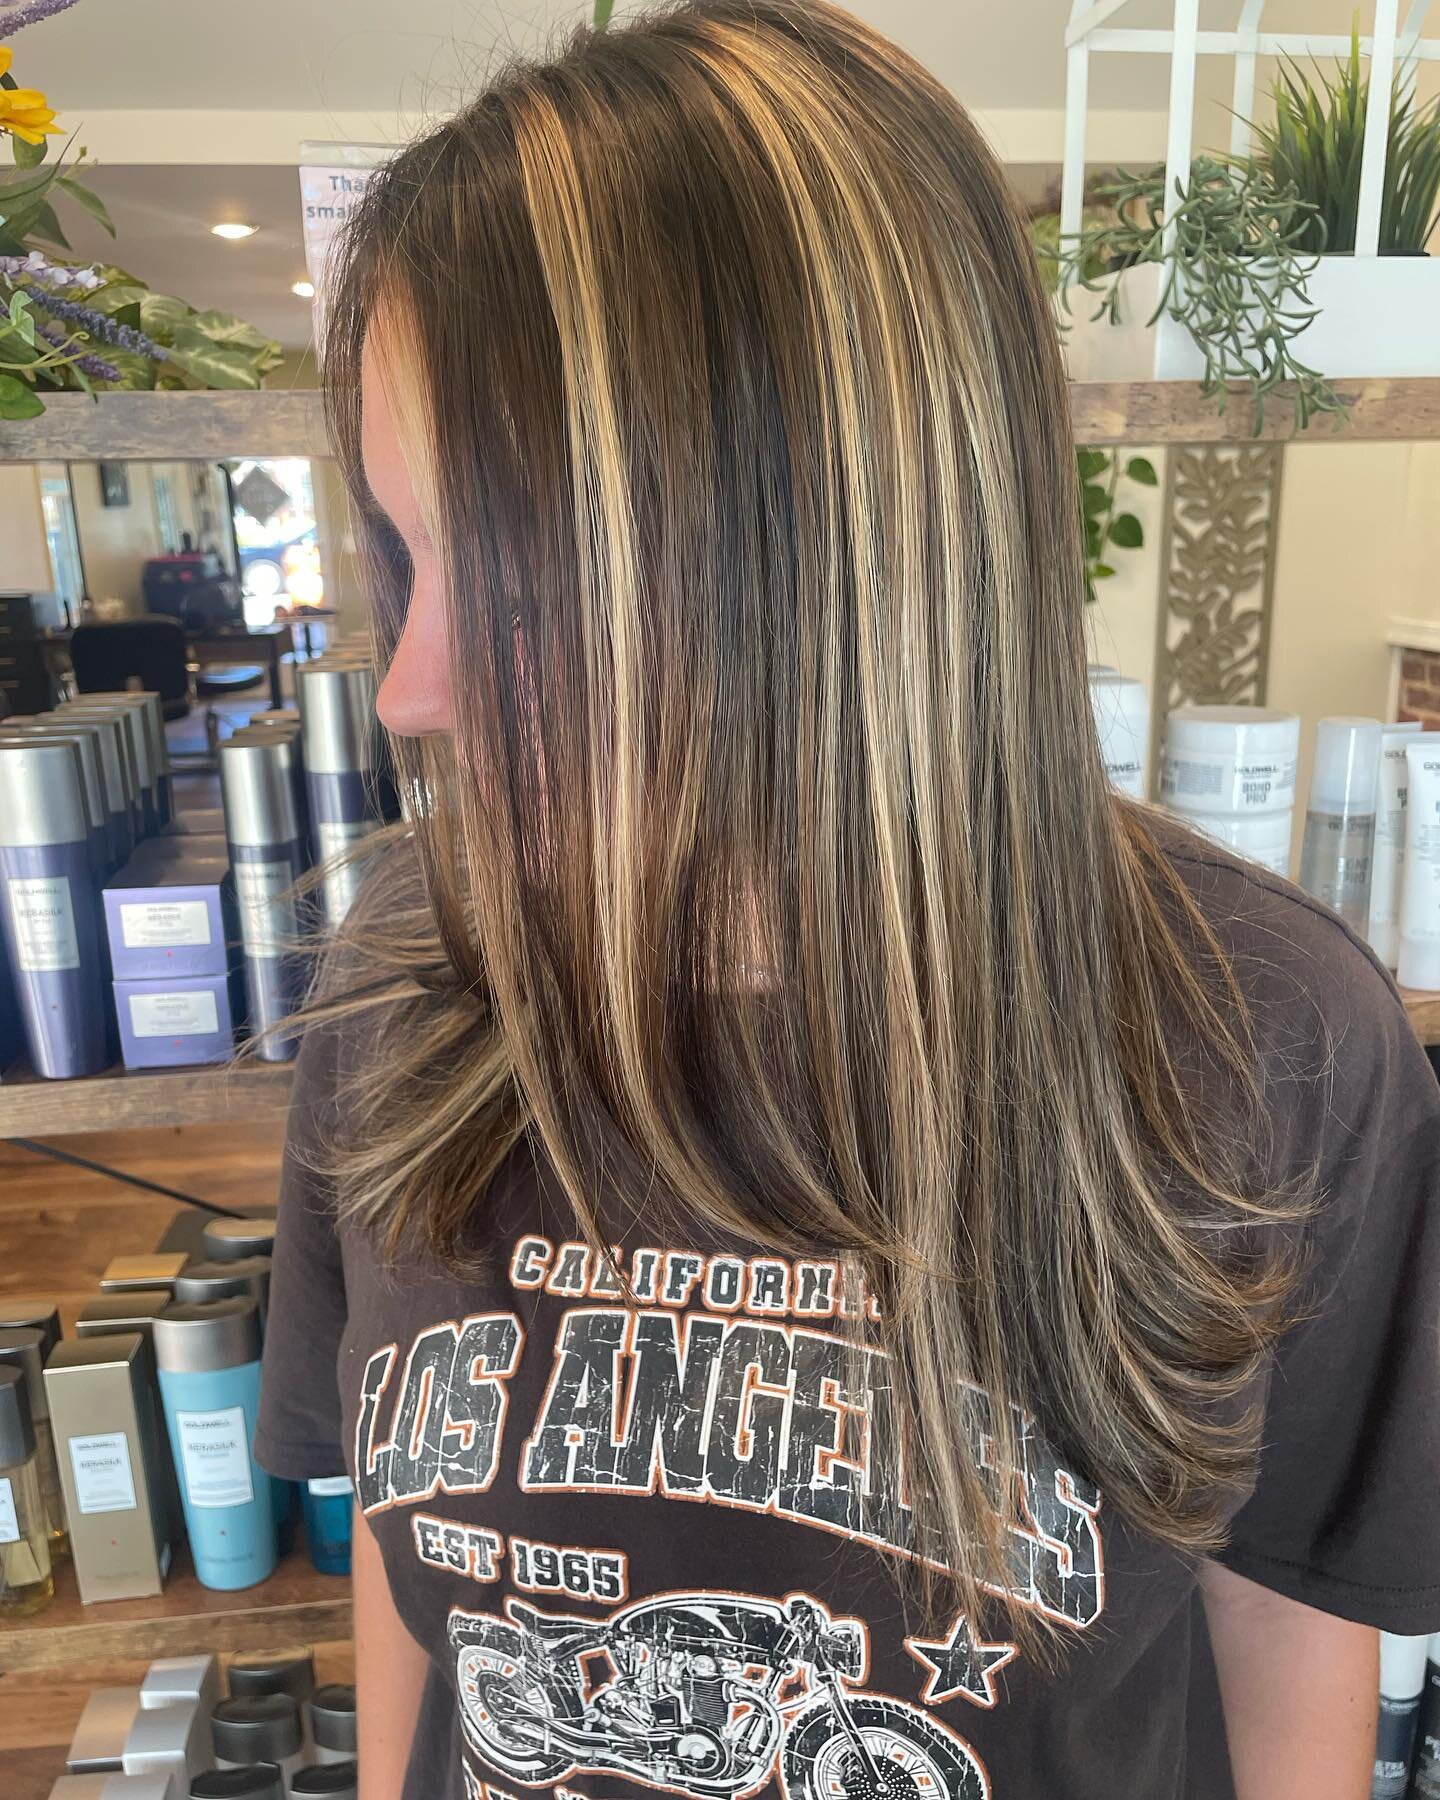 Back to school lows and lights, love it! 
Hair by Ron May 

Call us at 856.624.9140 to book your appointment. 

#goldwell #goldwellcolor #goldwellapprovedus #goldwellcolorance #goldwellpurepigments #goldwelltopchic #goldwellsalon #njsalon #njstylist 